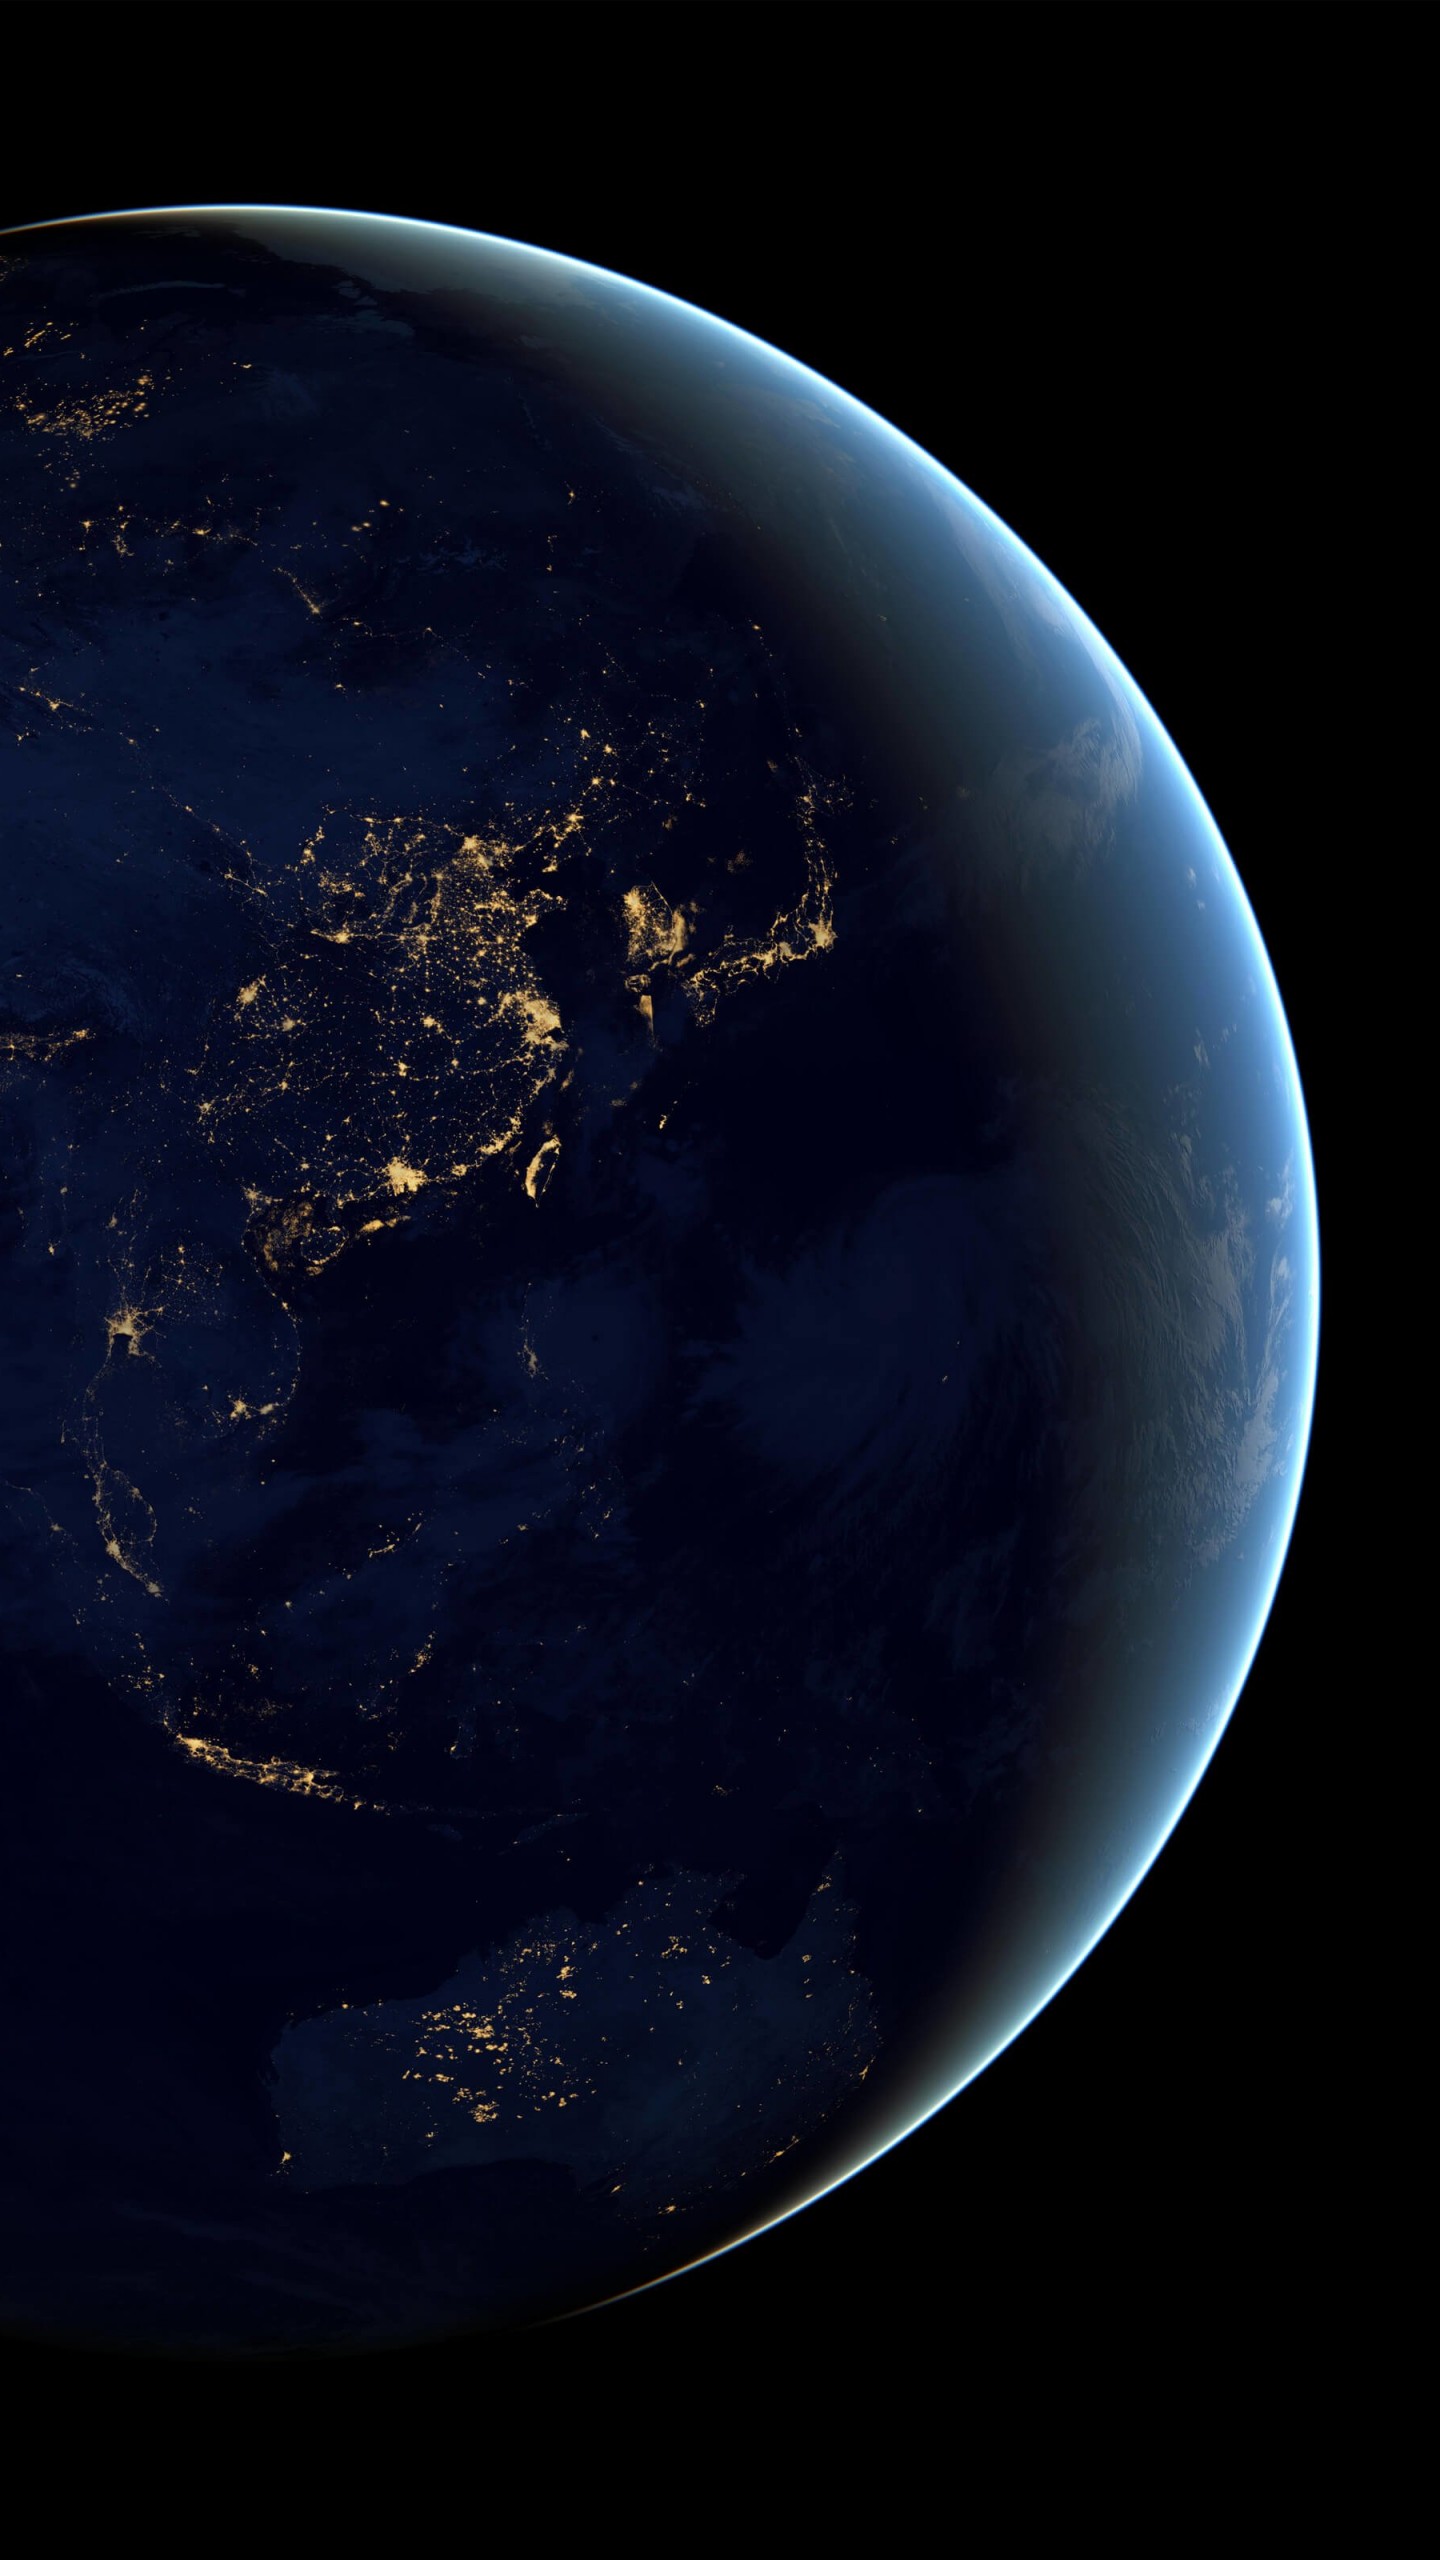 Earth At Night Seen From Space Wallpaper for SAMSUNG Galaxy Note 4